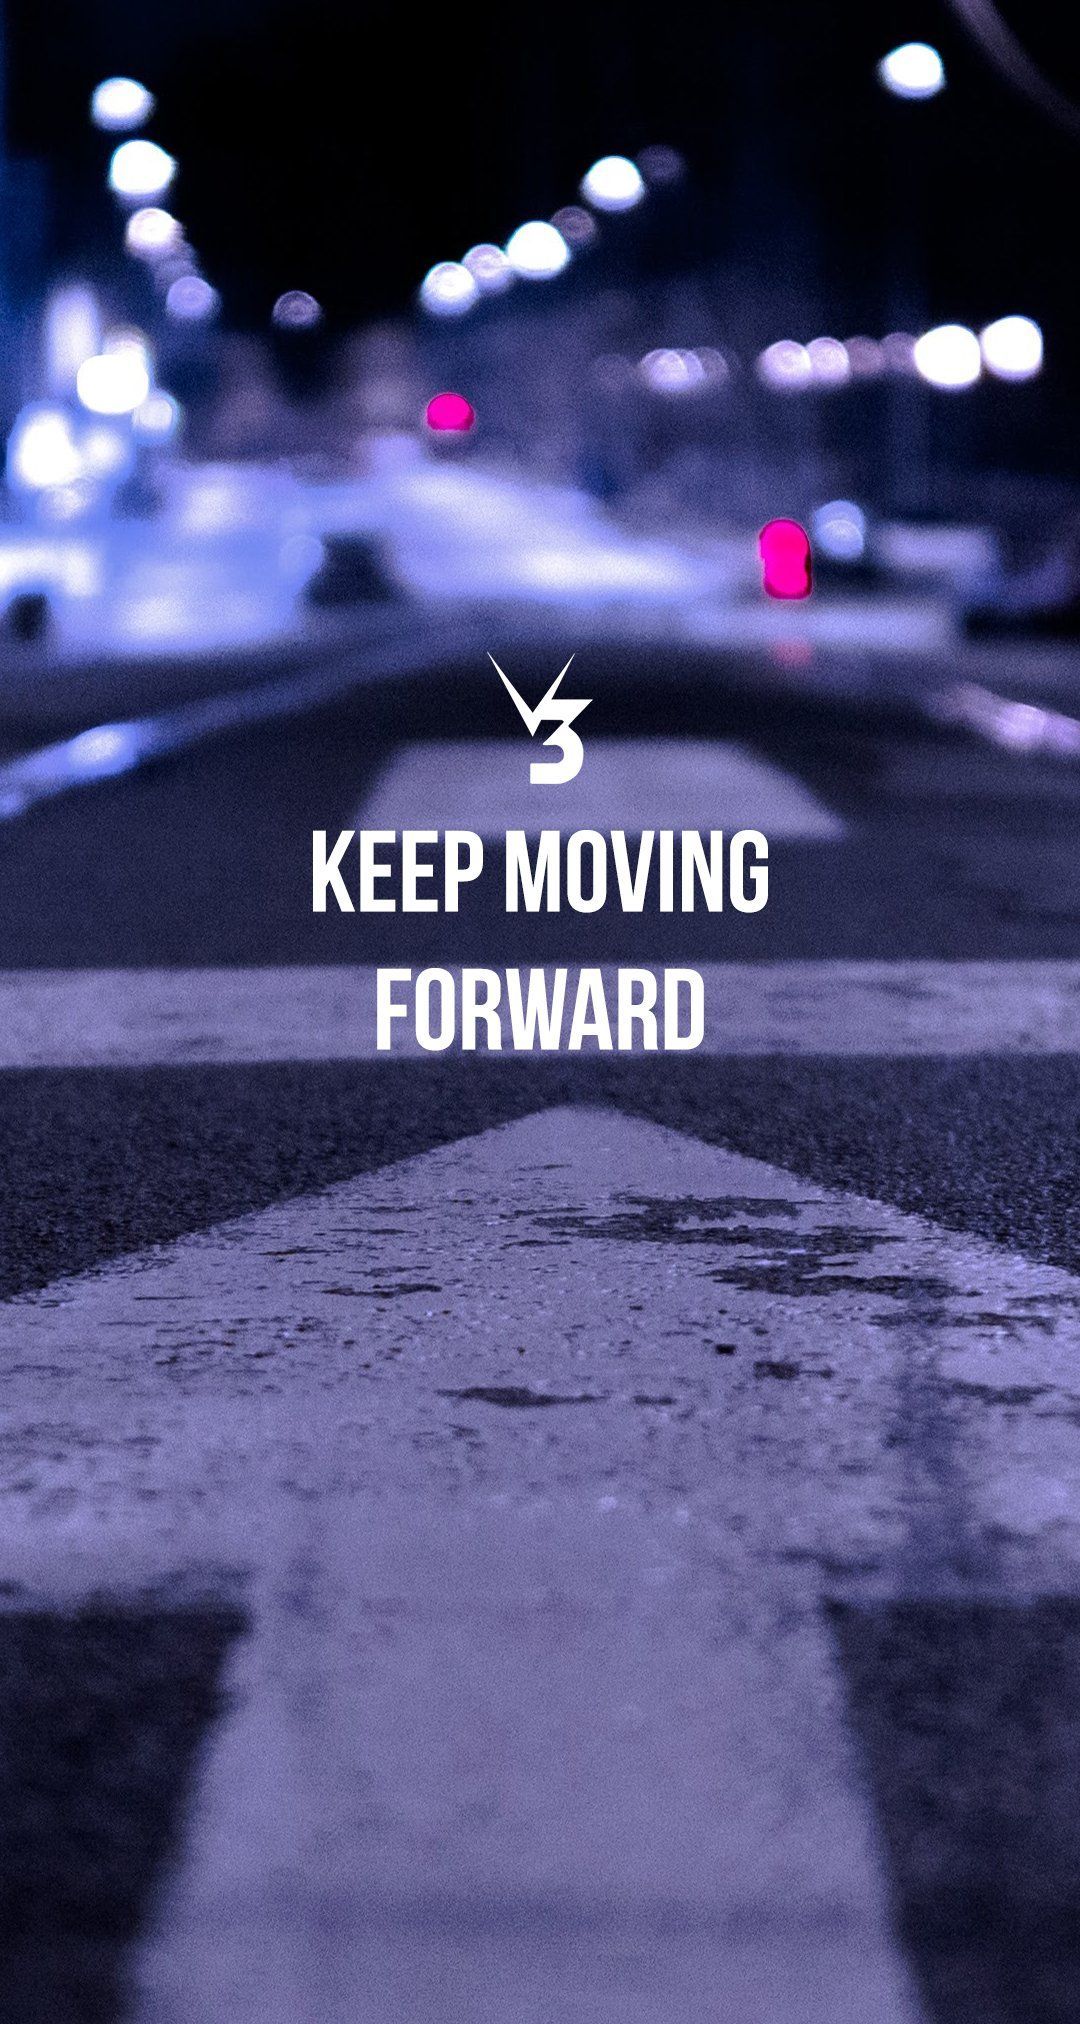 Keep moving forward gym motivation wallpaper motivational quotes wallpaper motivational quotes for working out